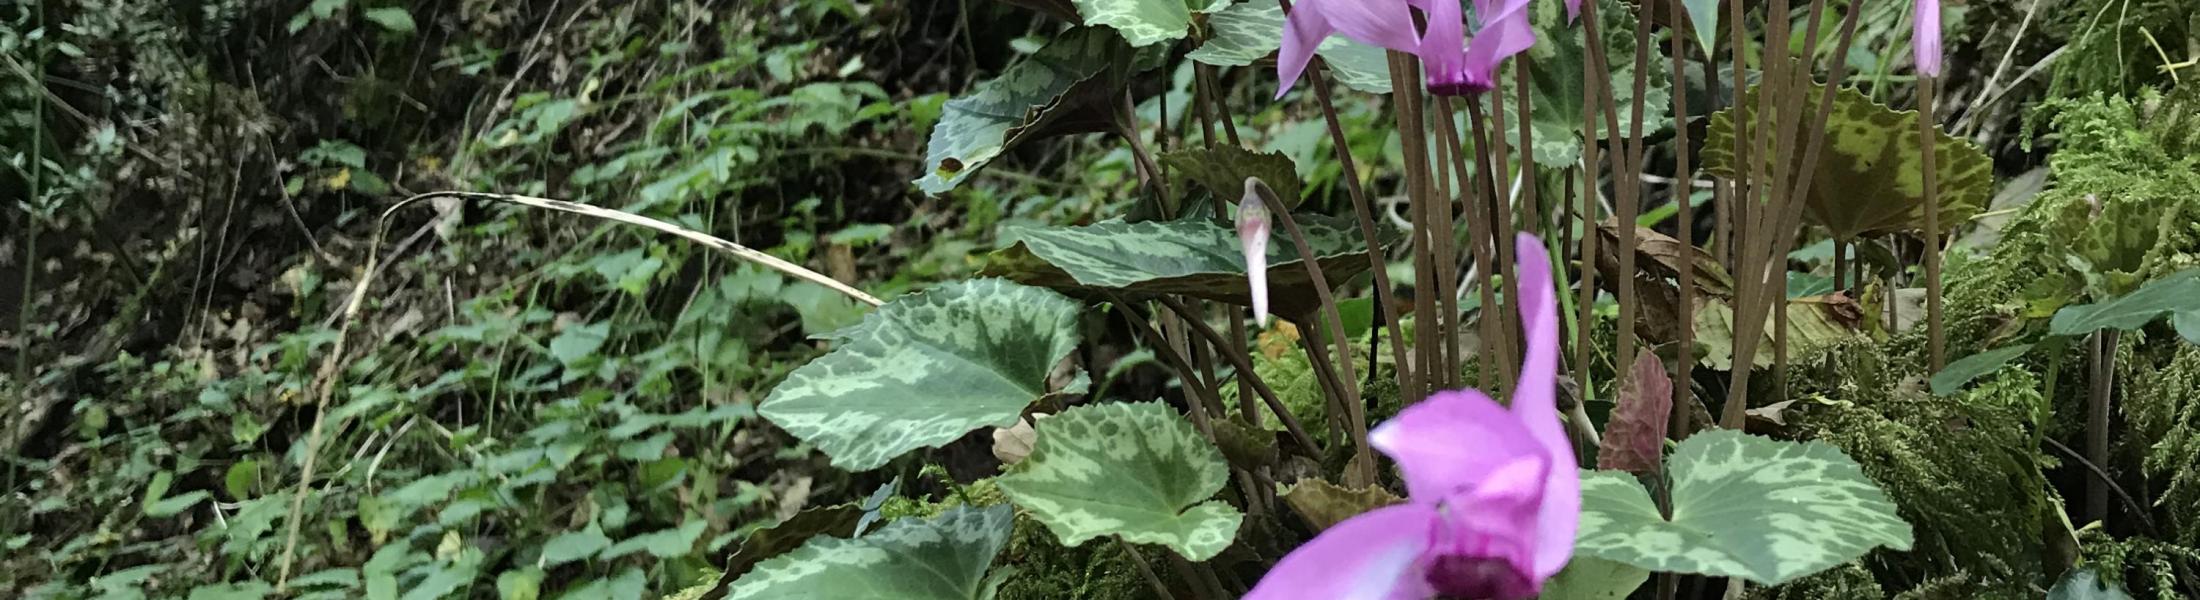 wild cyclamen growing on lush forest